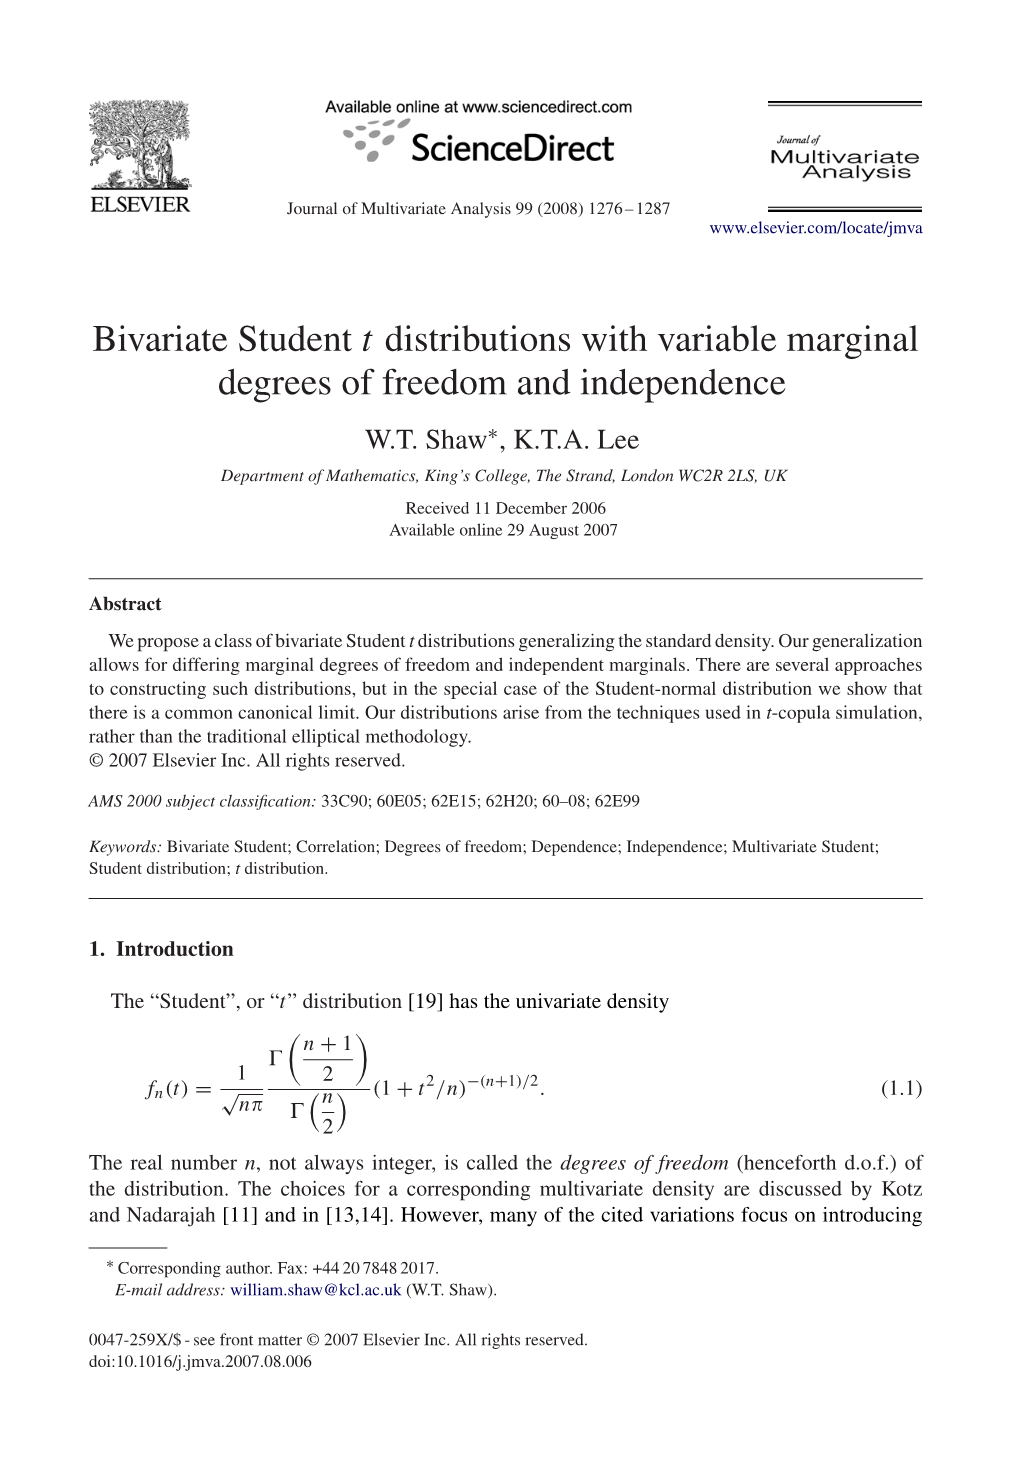 Bivariate Student T Distributions with Variable Marginal Degrees of Freedom and Independence W.T